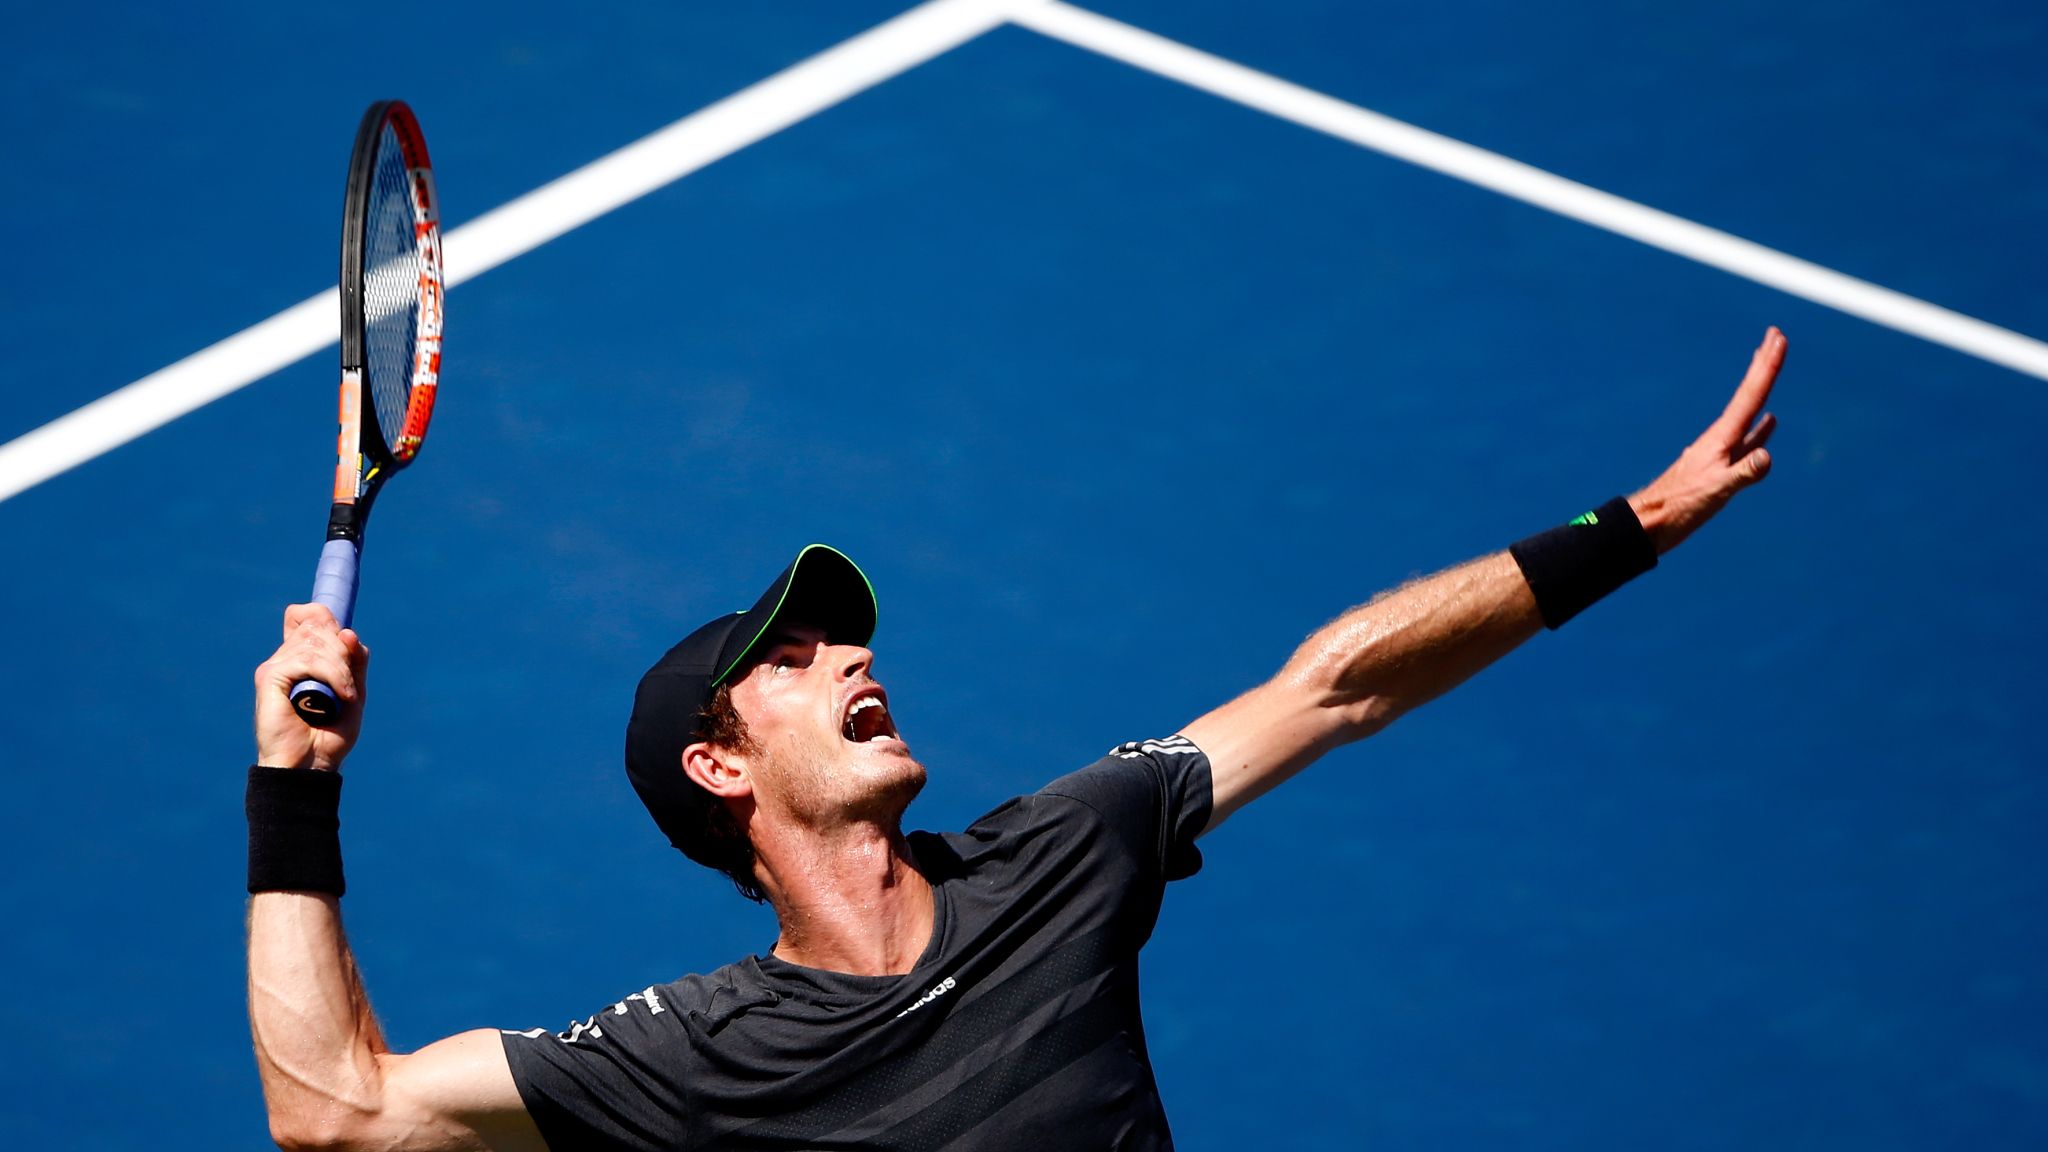 US Open 2014 Eighth seed Andy Murray admits he was lucky after win over Robin Haase Tennis News Sky Sports